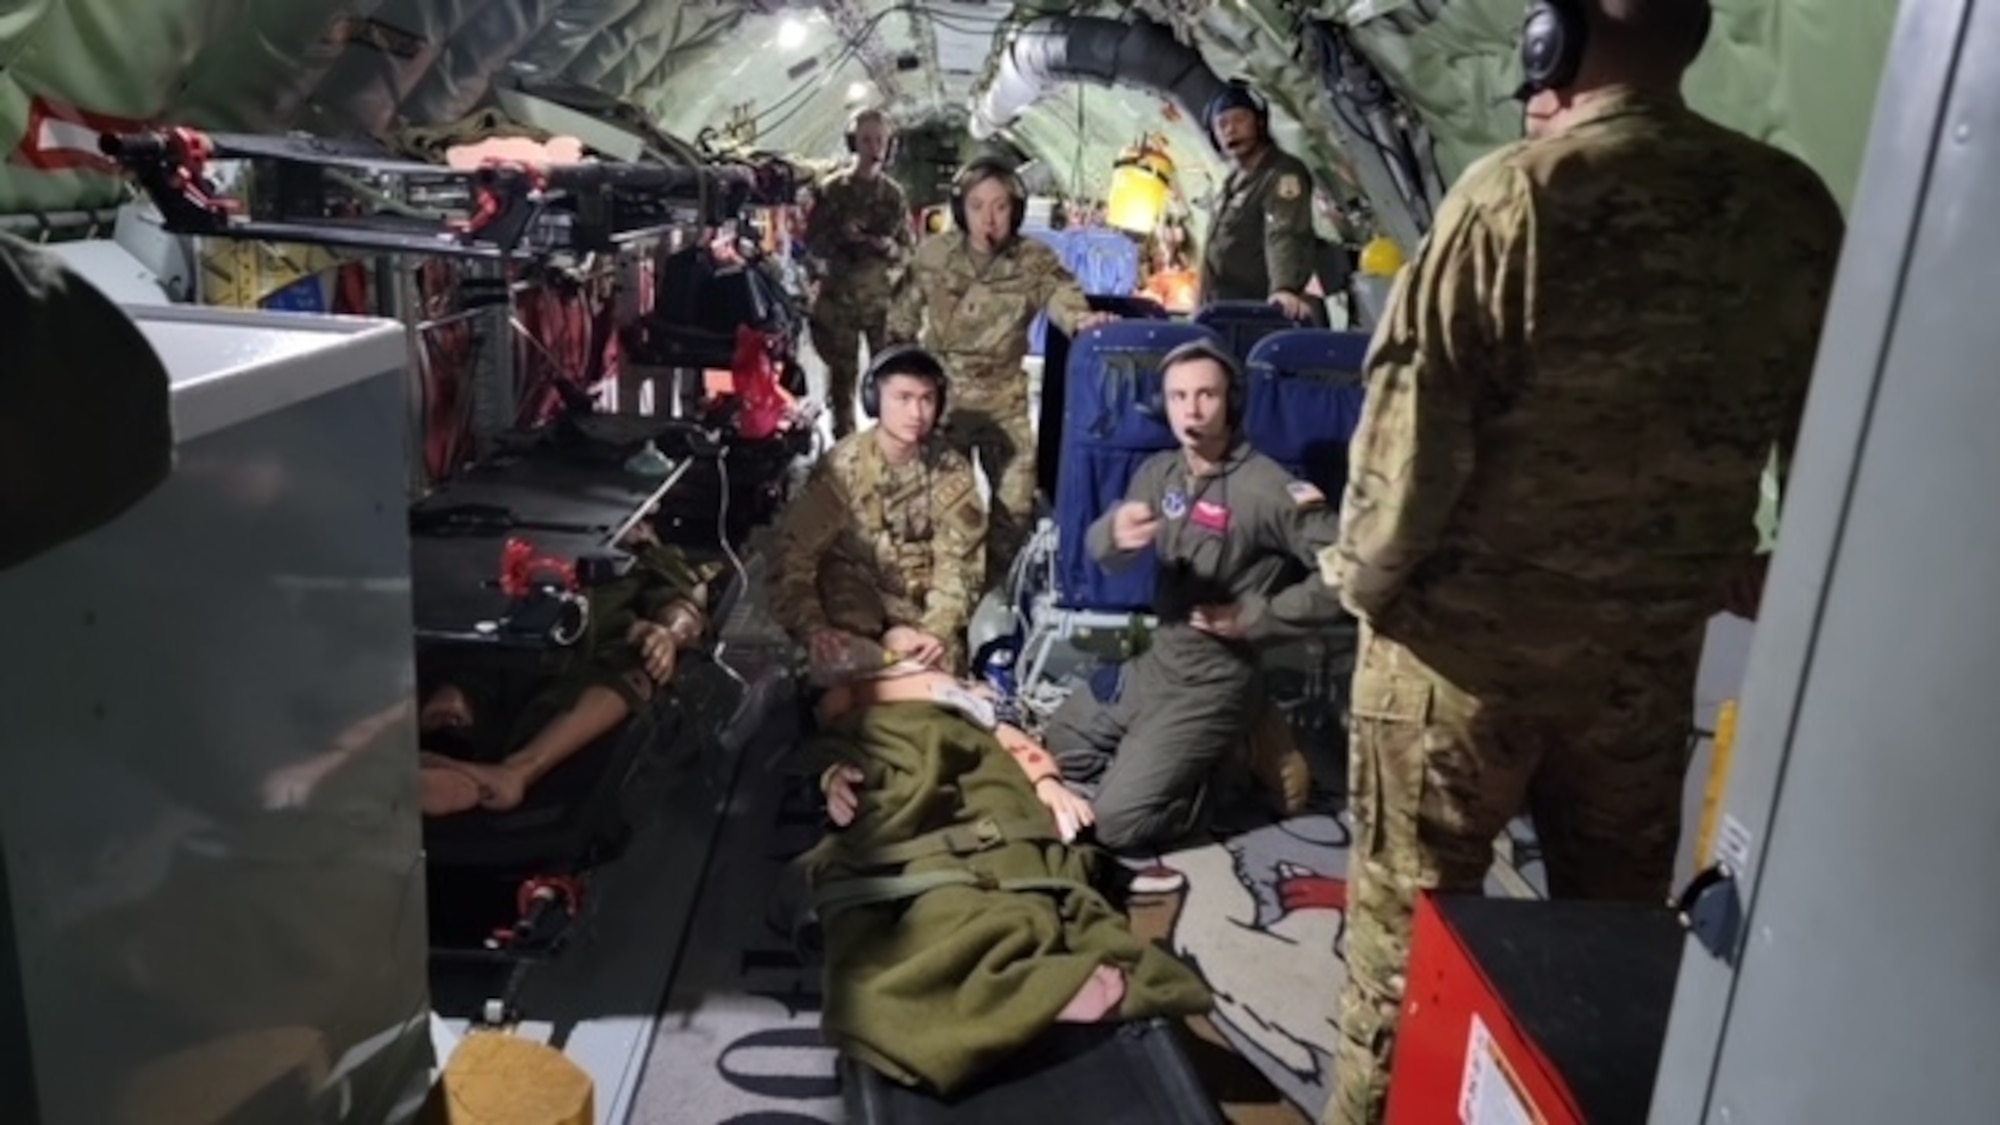 The 117th Air Refueling Squadron and the 190th Aircraft Maintenance Squadron participate in an Aeromedical Evacuation training mission in Oklahoma hosted by the 137th Aeromedical Evacuation Squadron Jan. 11, 2023.